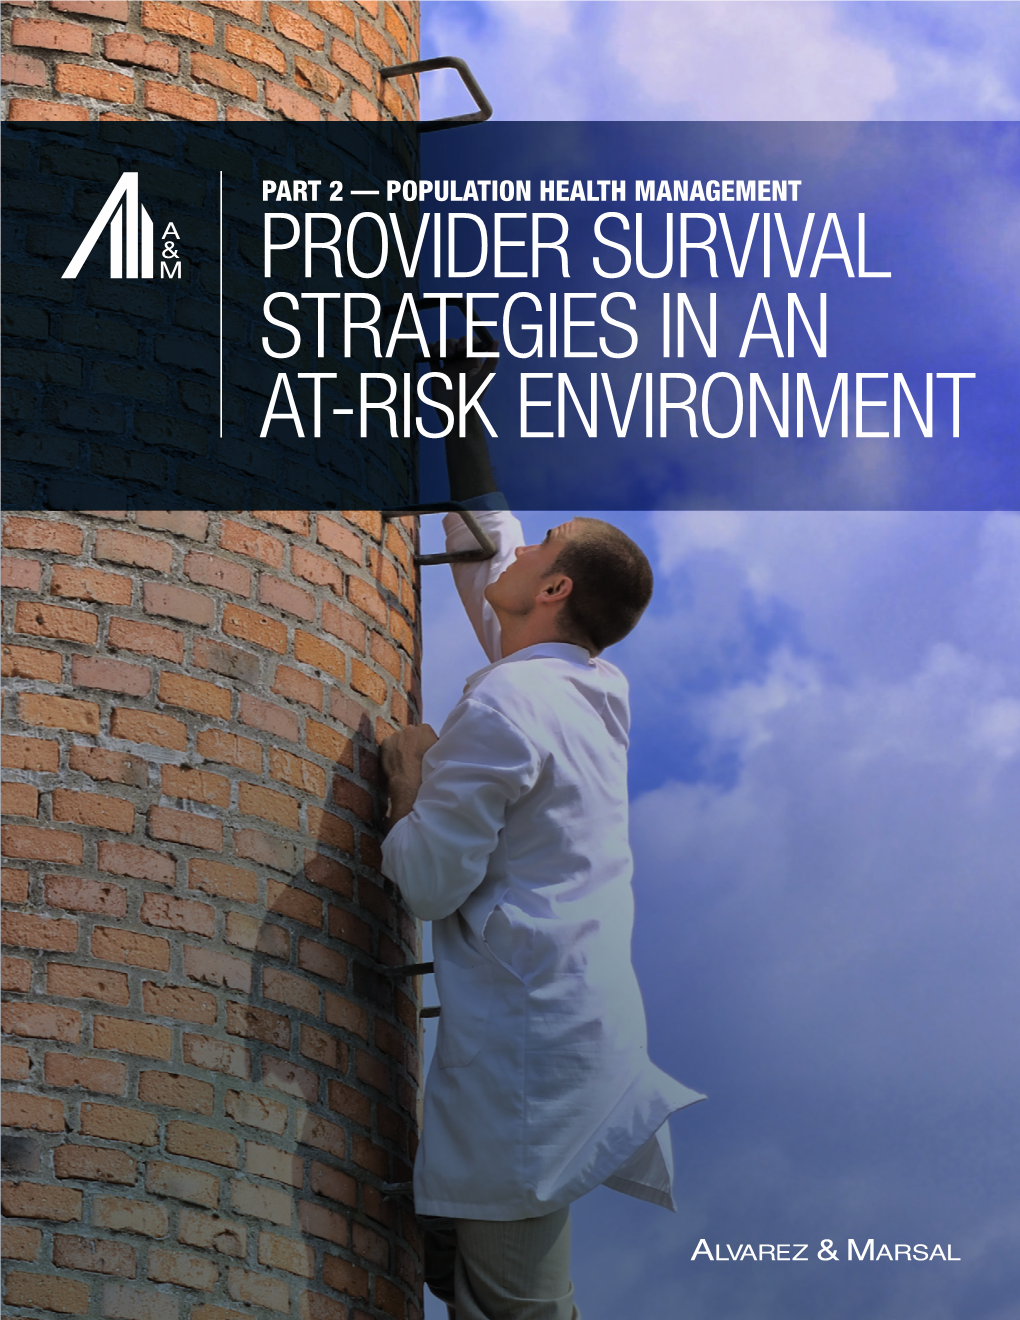 Provider Survival Strategies in an At-Risk Environment